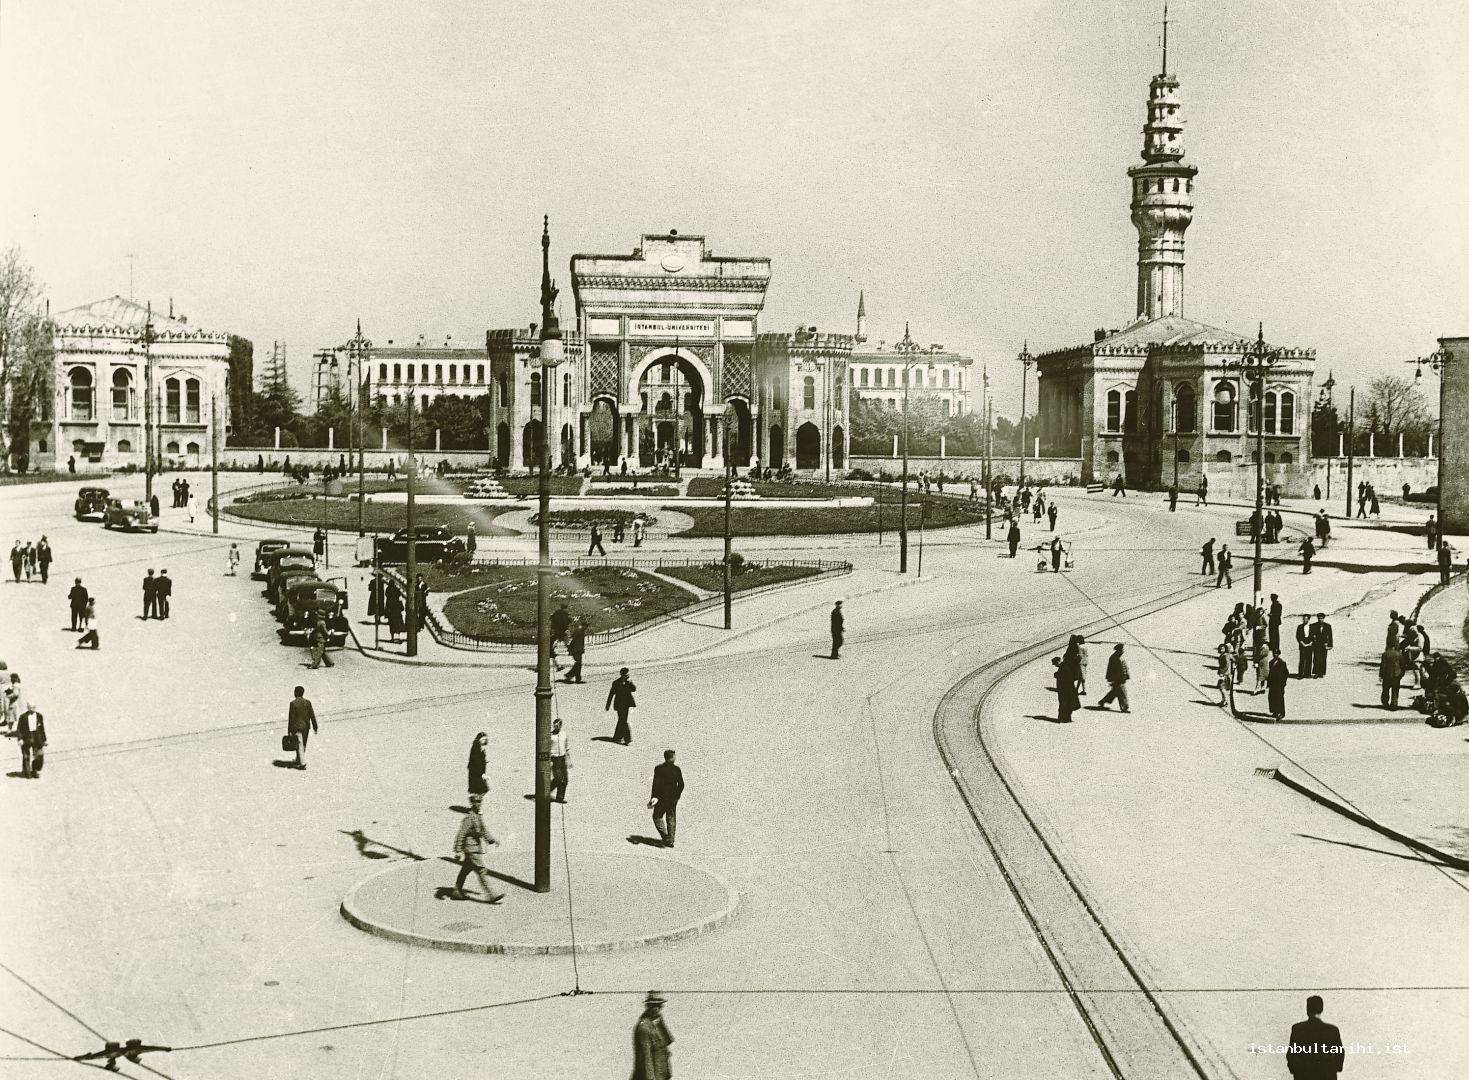 8- The view of Beyazıt Square in the 1940s. The Pool of Haydar Bey and tramway were still in their places. It is a photo which reflects the square existing in memories with its   all aspects